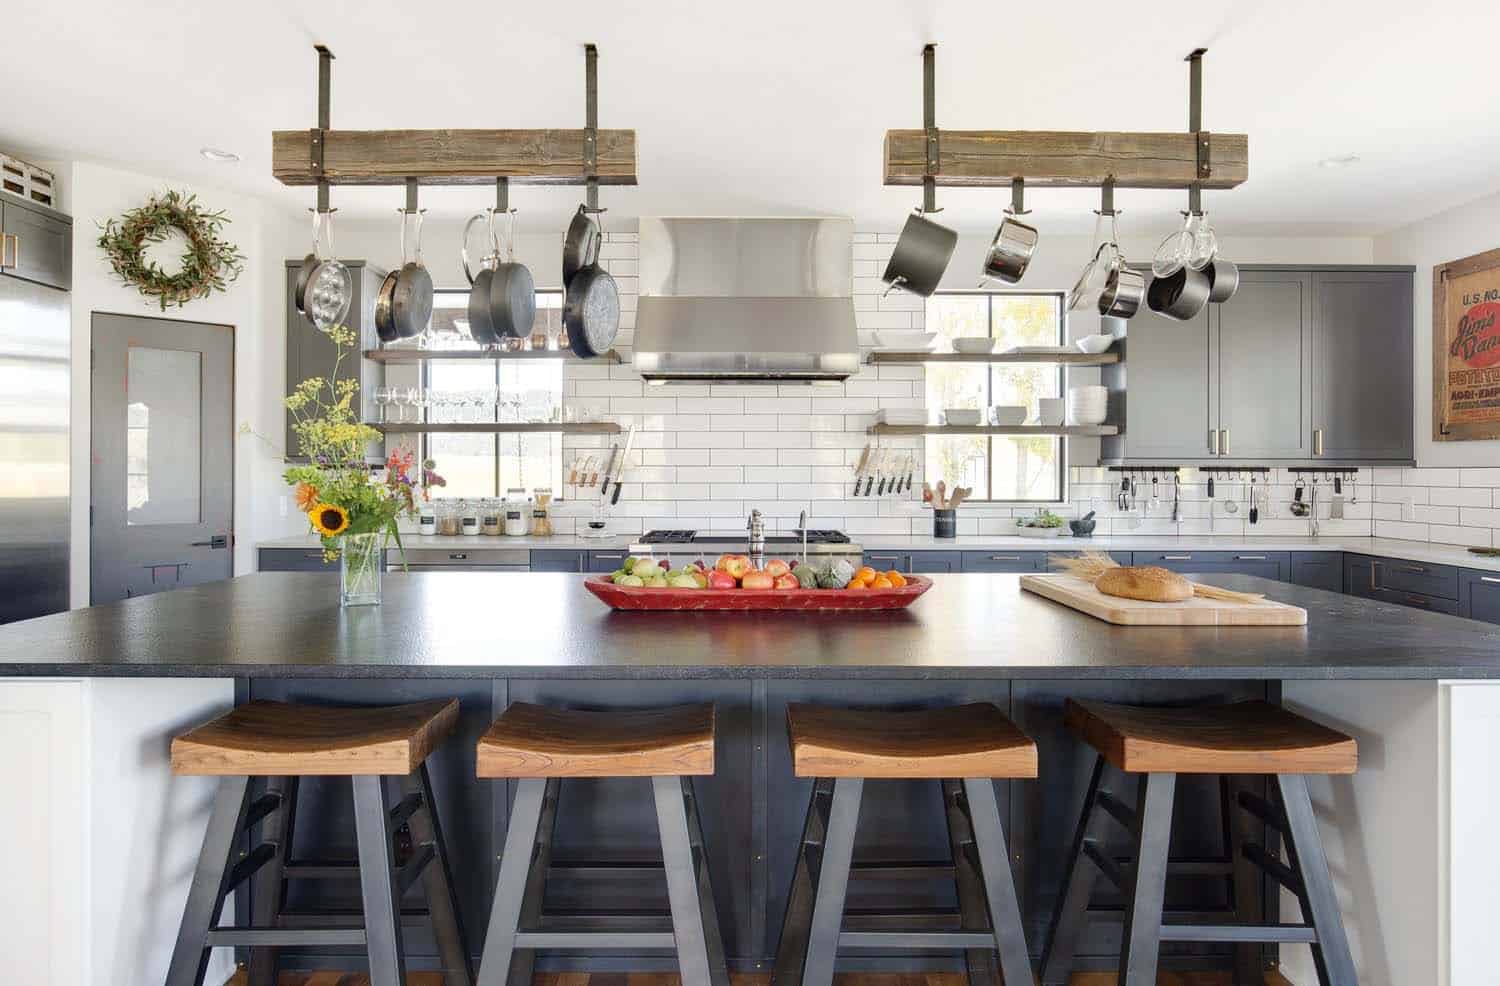 See this cozy and inviting modern farmhouse in the Colorado mountains